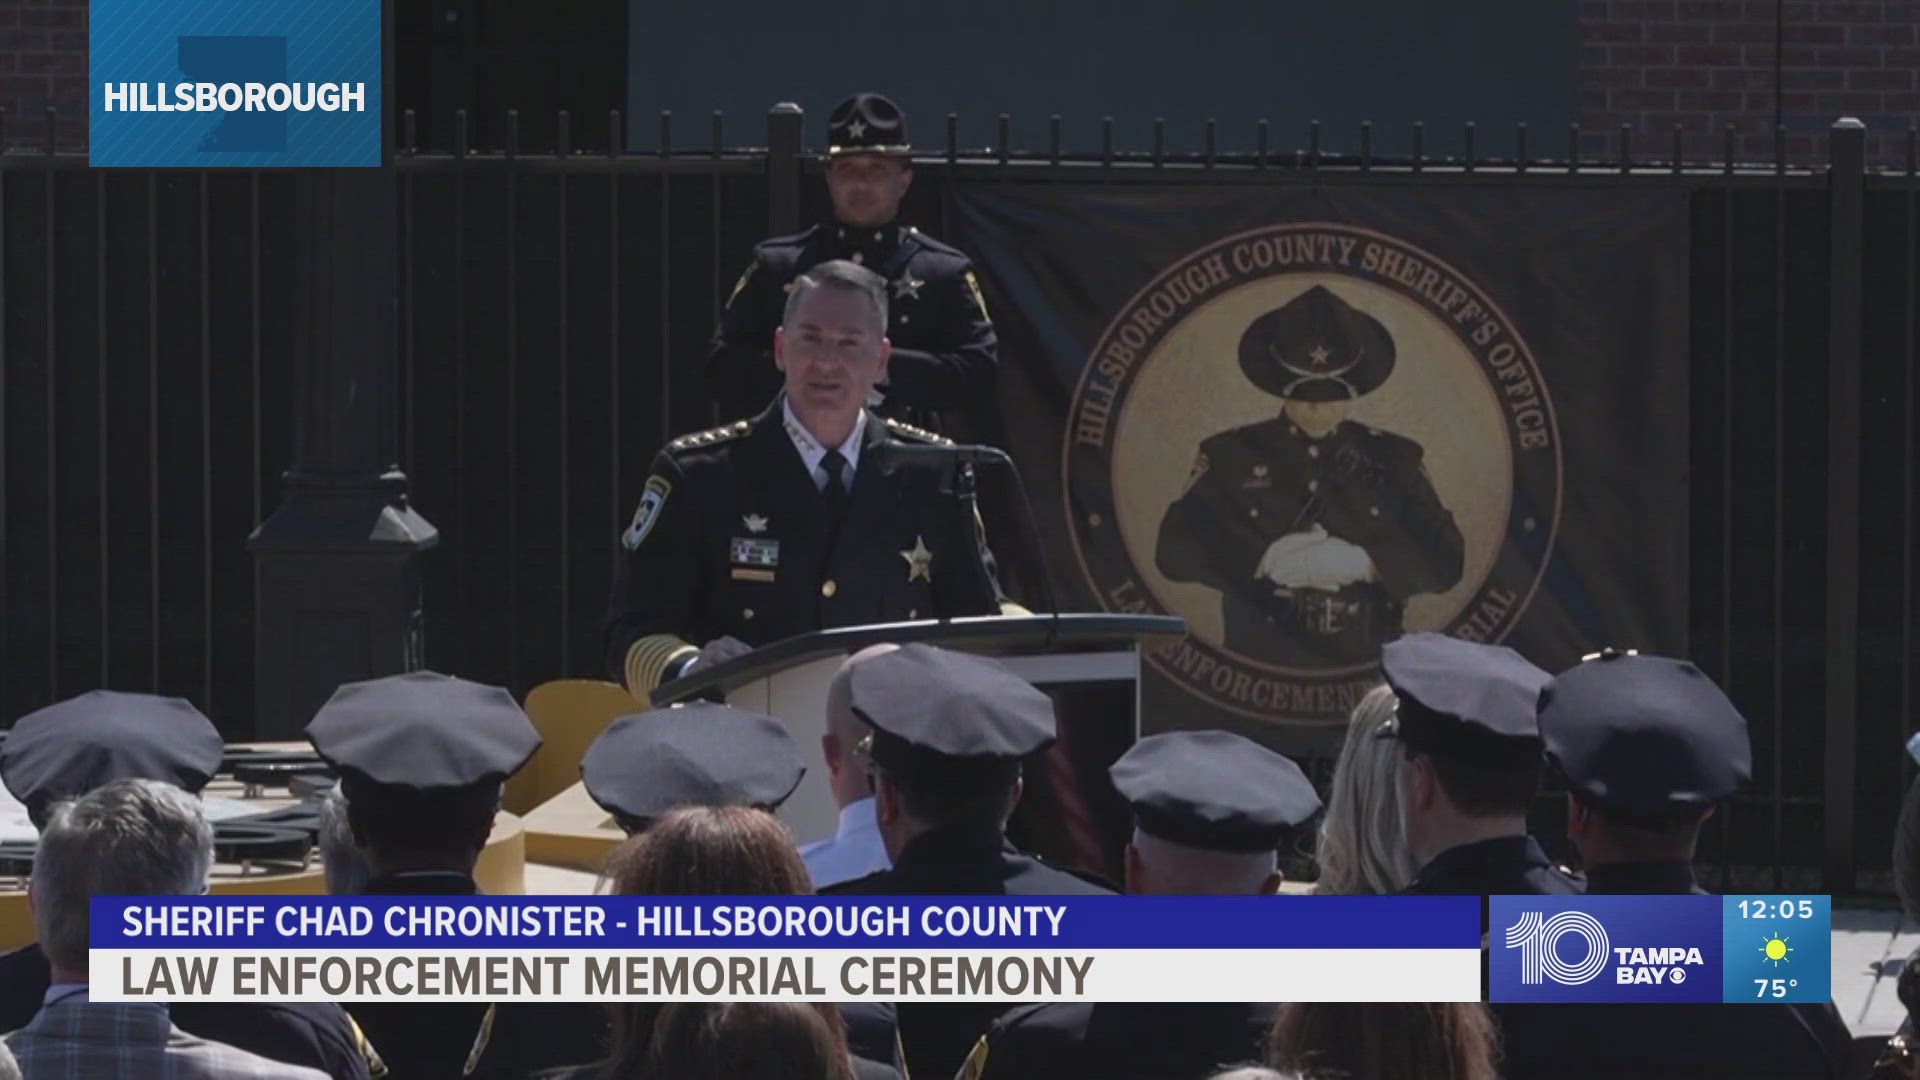 The ceremony included a 21-gun salute and a flyover for the 17 HCSO heroes who lost their lives in the line of duty.